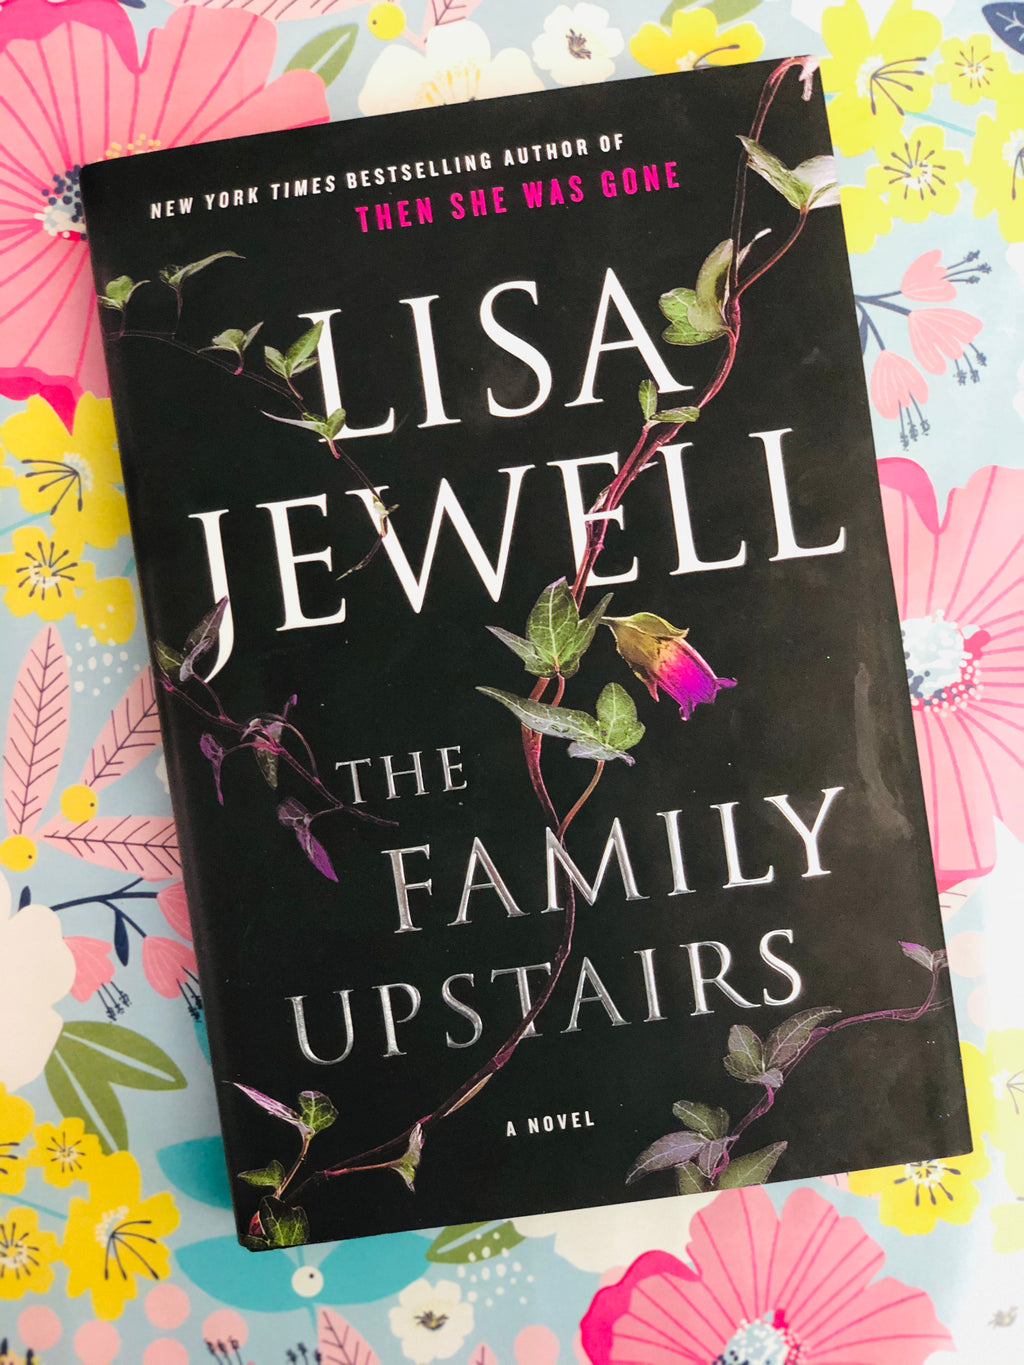 The Family Upstairs- By Lisa Jewell